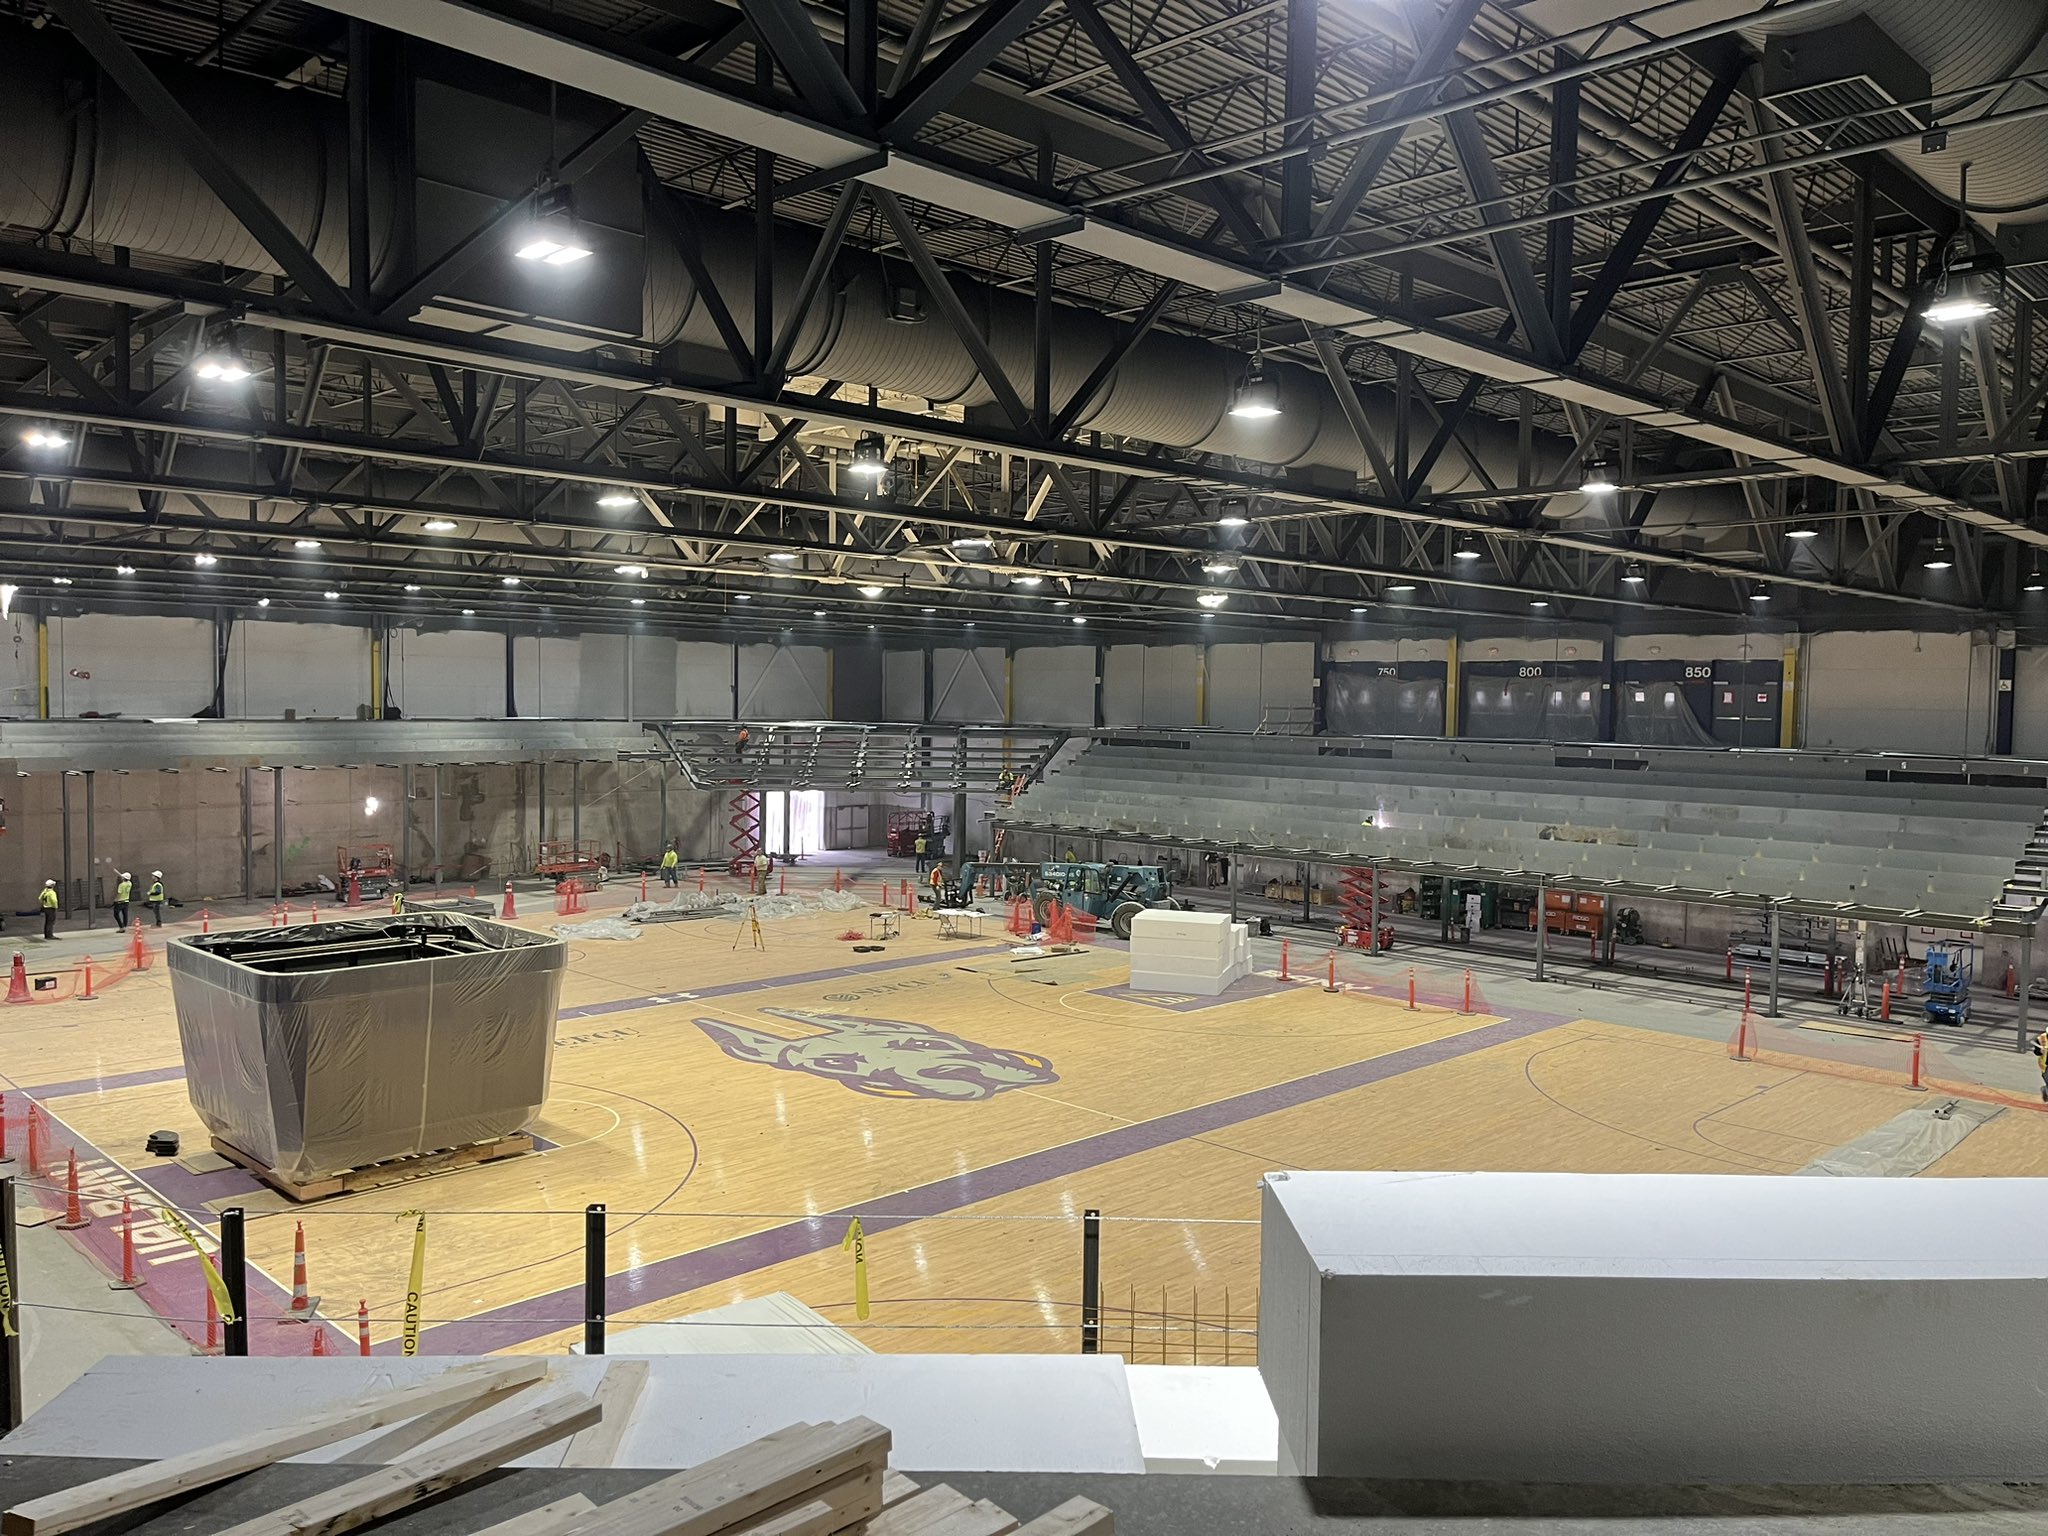 SEFCU Arena at the University at Albany under construction.